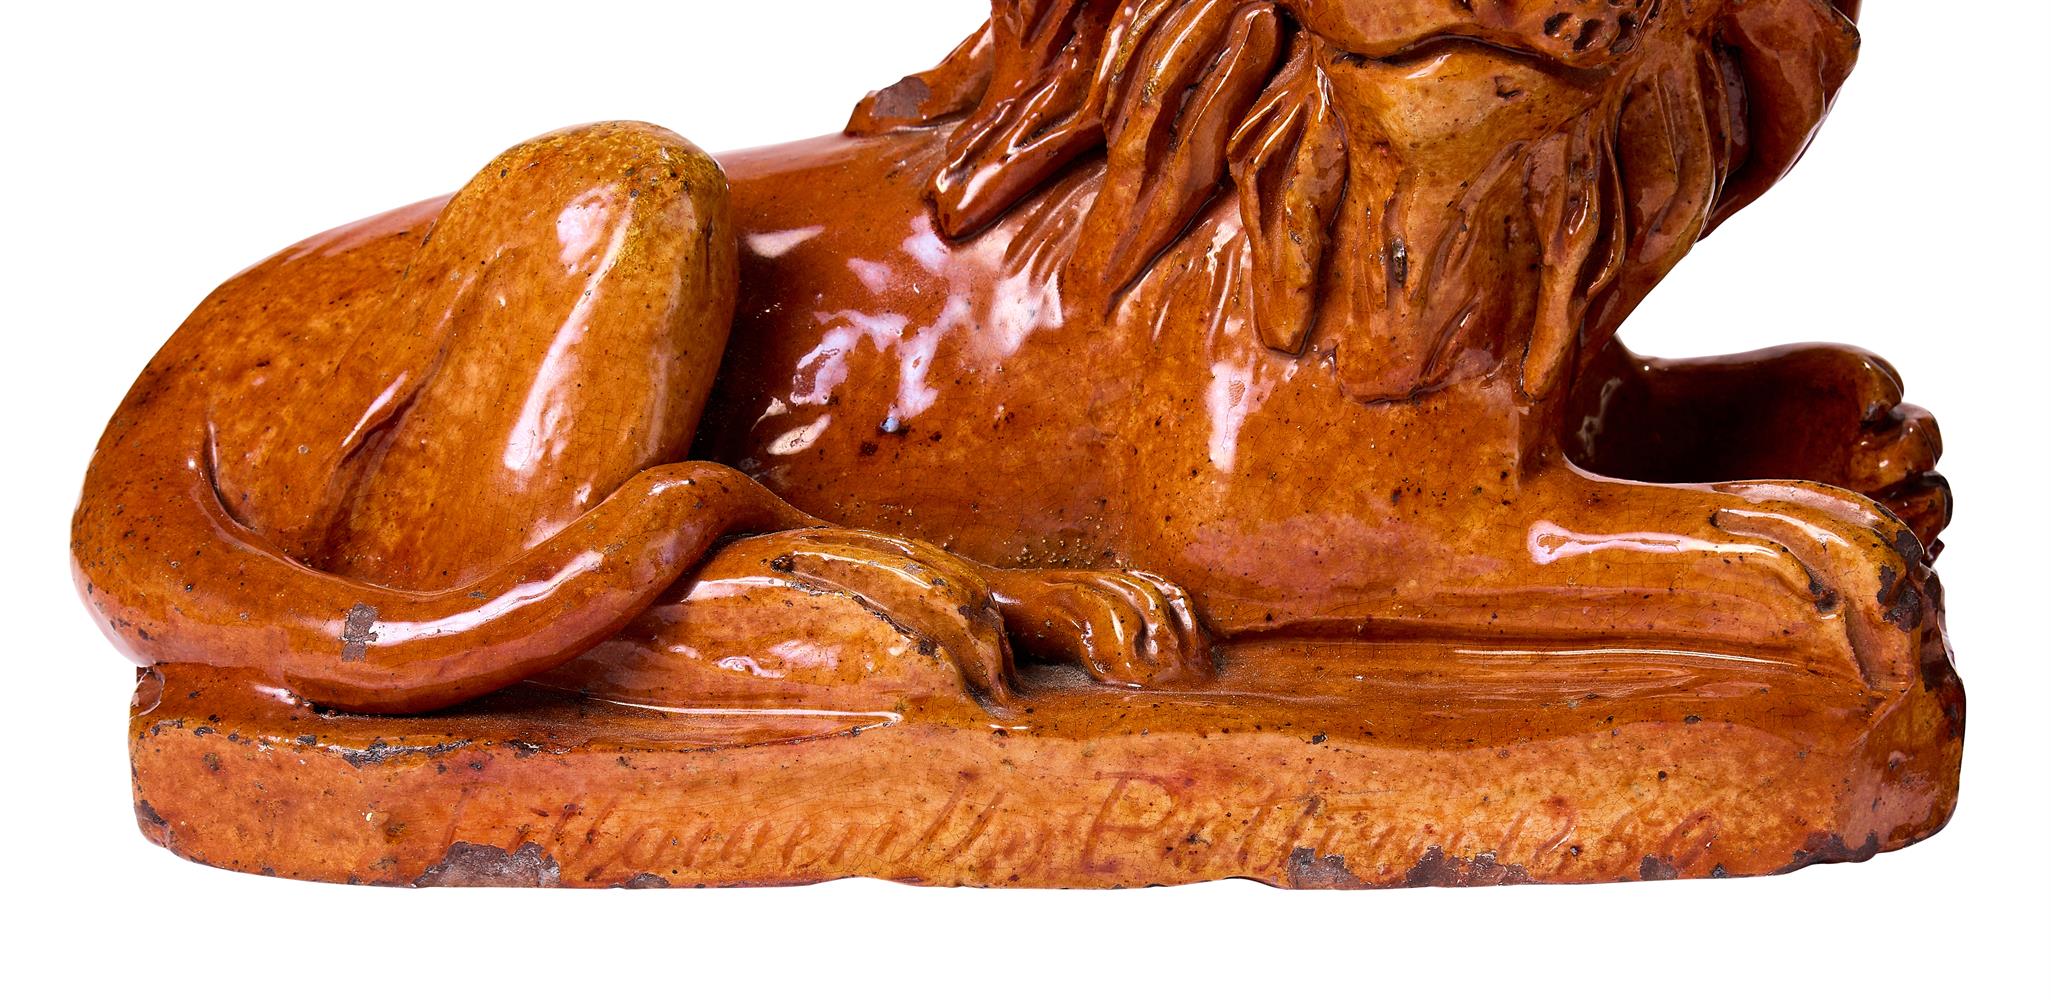 A PAIR OF PILL POTTERY (NEWPORT MONMOUTHSHIRE) TREACLE-GLAZED RED POTTERY MODELS OF RECUMBENT LIONS - Image 3 of 3